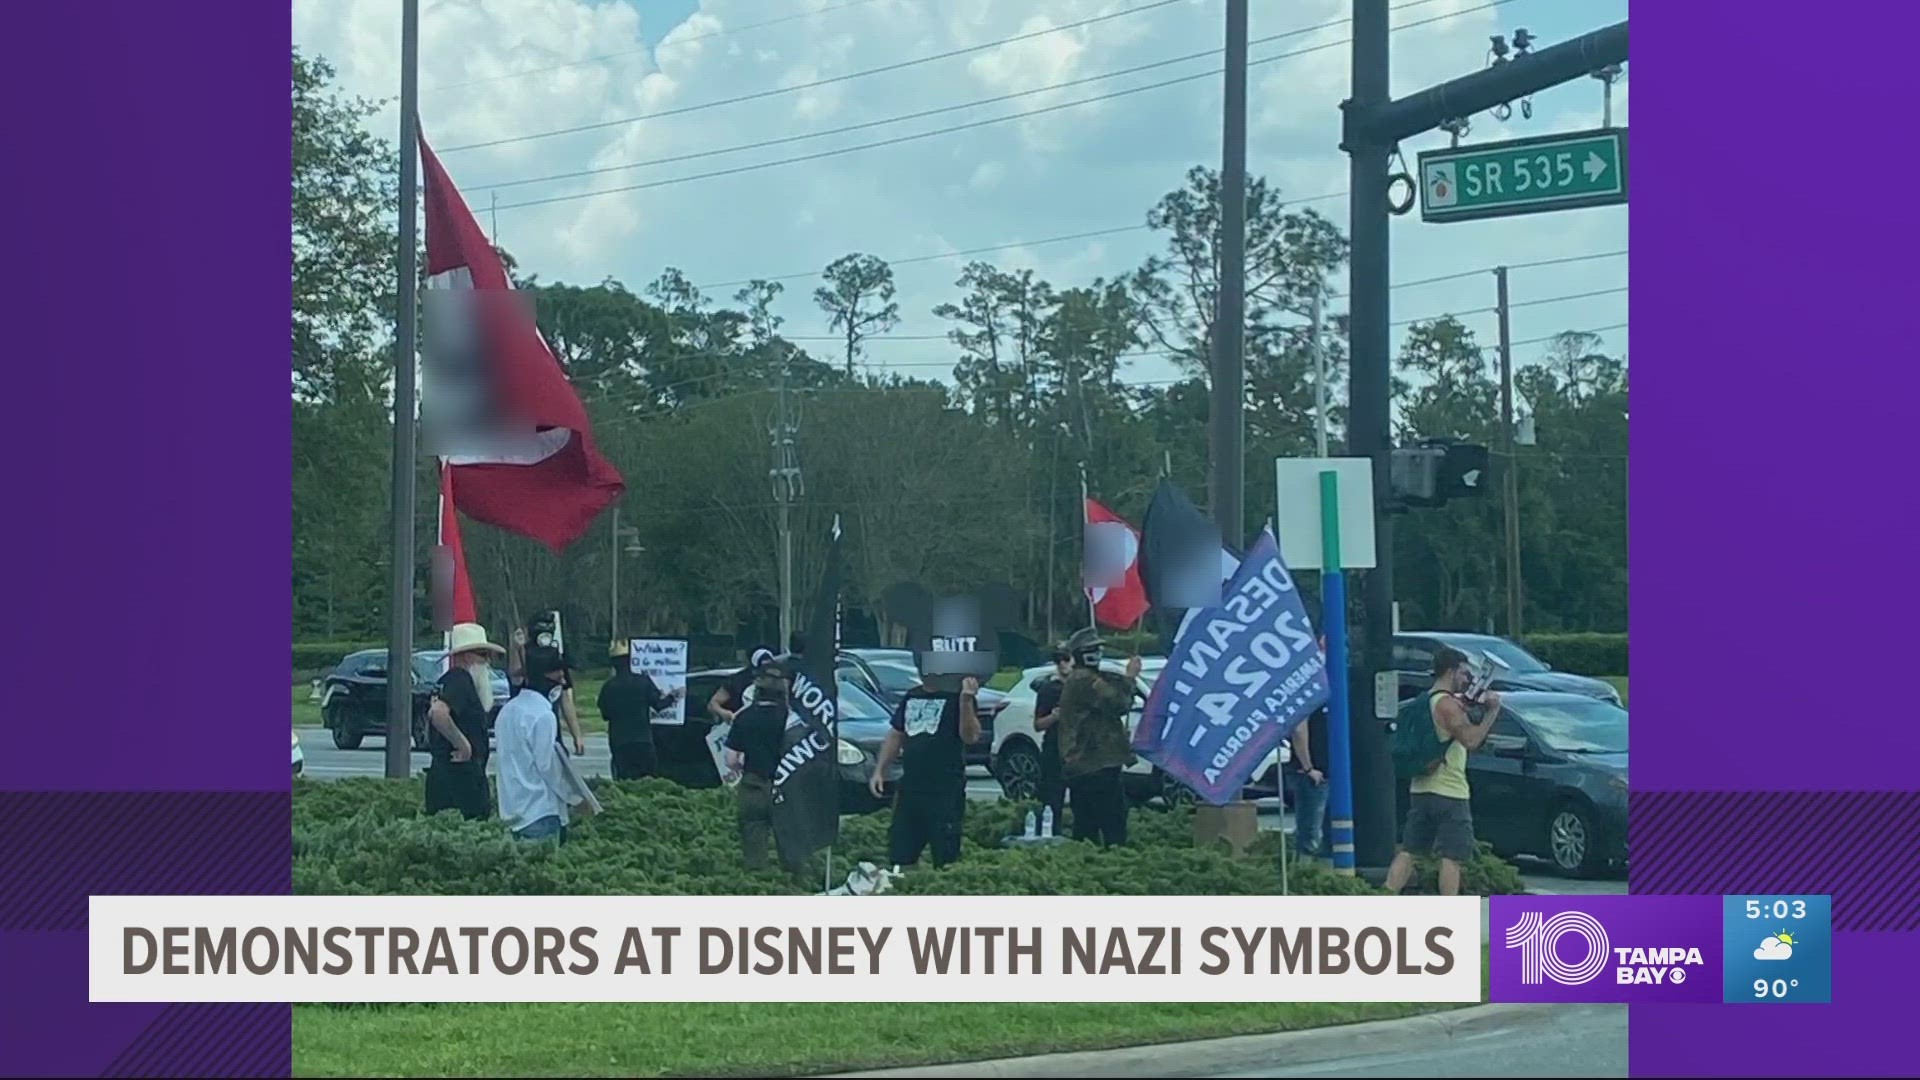 "Nazis outside of Walt Disney World right now — absolutely disgusting," a Florida lawmaker wrote on Twitter.